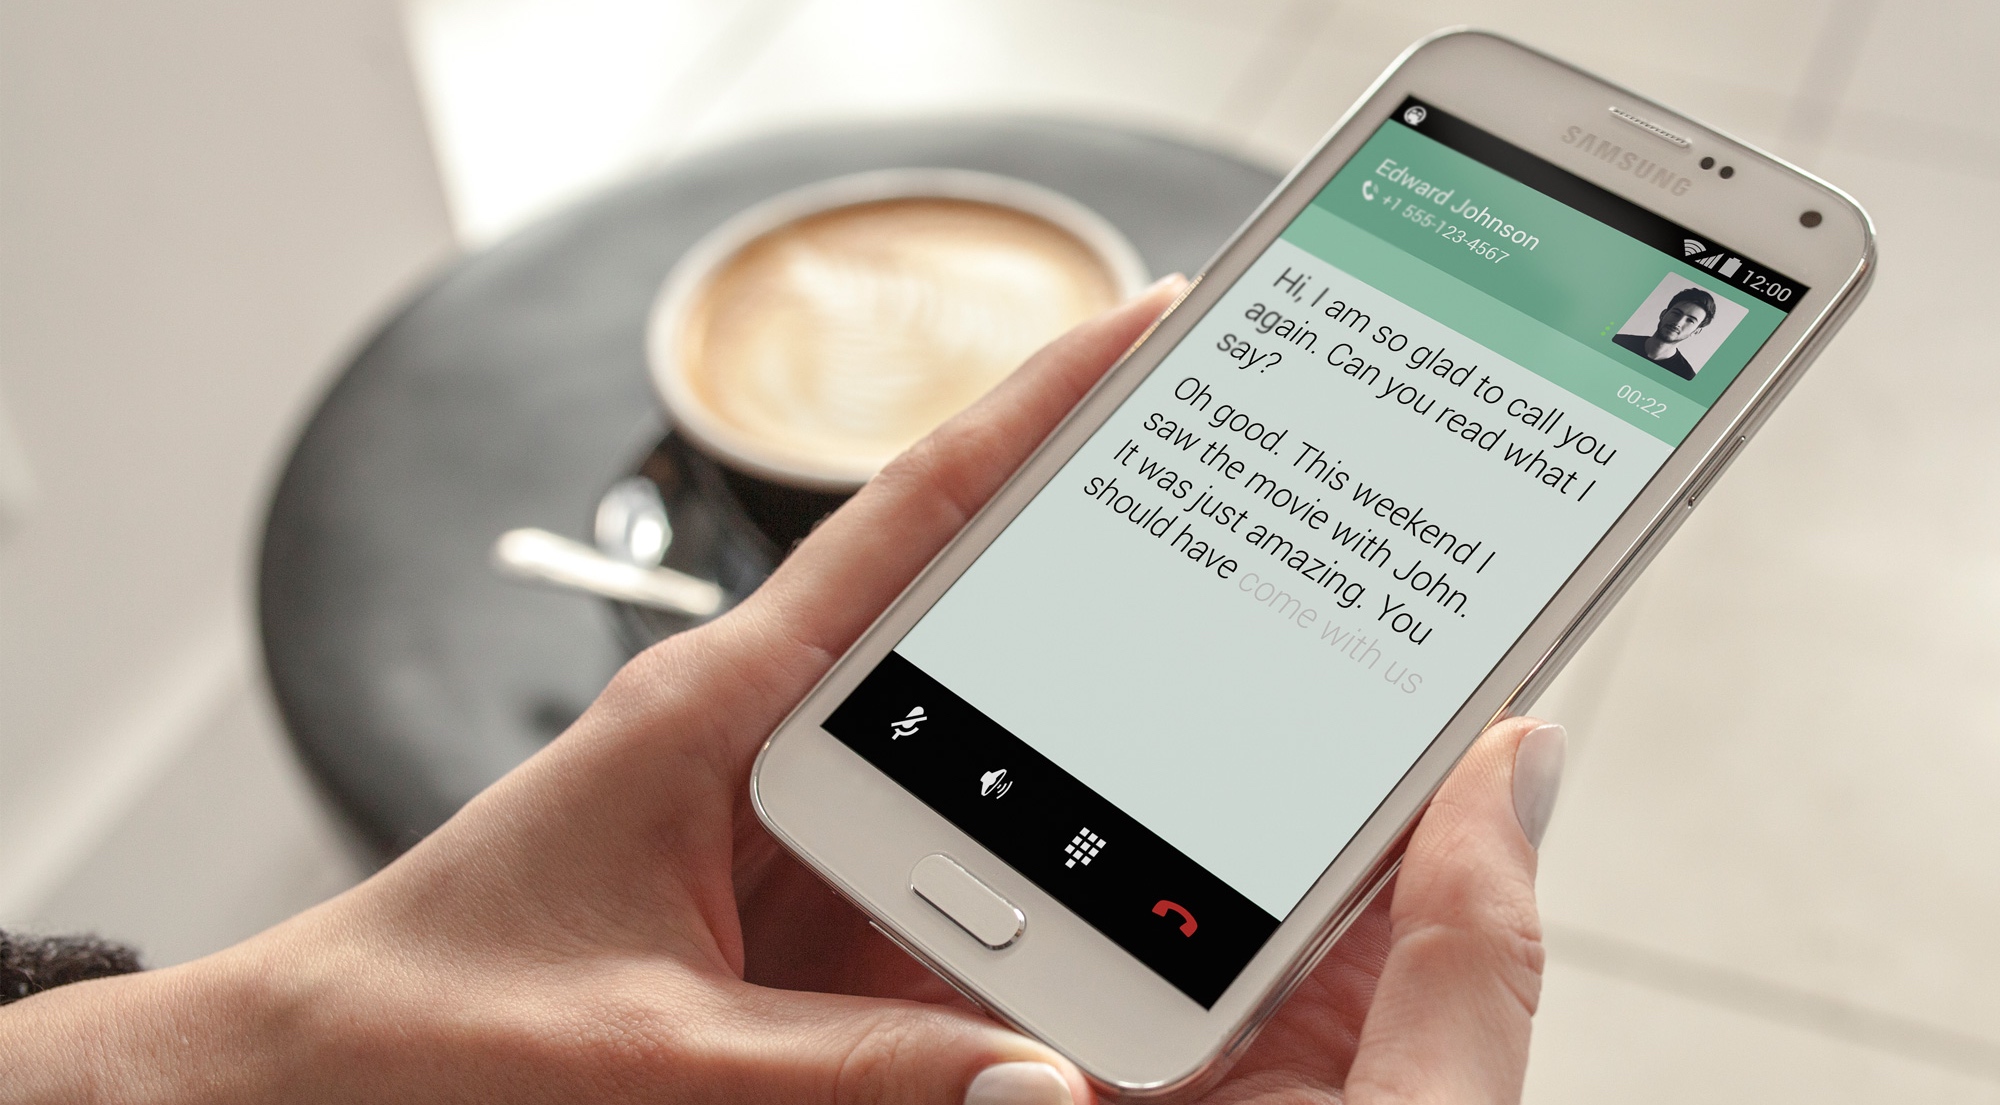 With RogerVoice, Deaf People Can Make Their First Phone Calls | TechCrunch